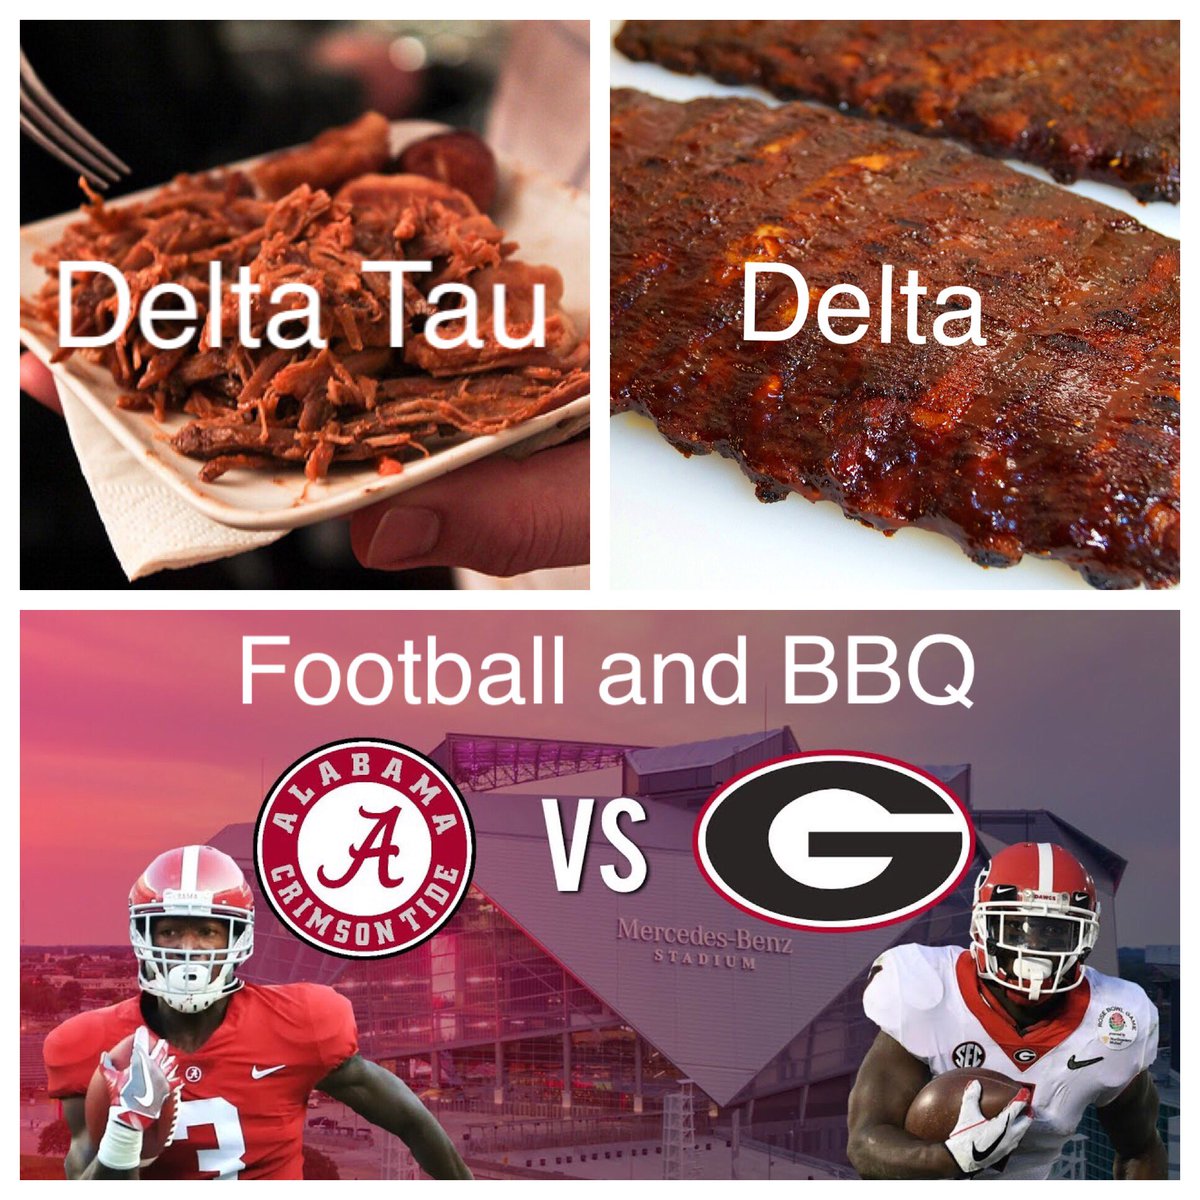 Come out tonight and watch the College Football National Championship and enjoy some BBQ with the brothers of Delta Tau Delta #RushExcellence #ExcellenceEatsBBQ